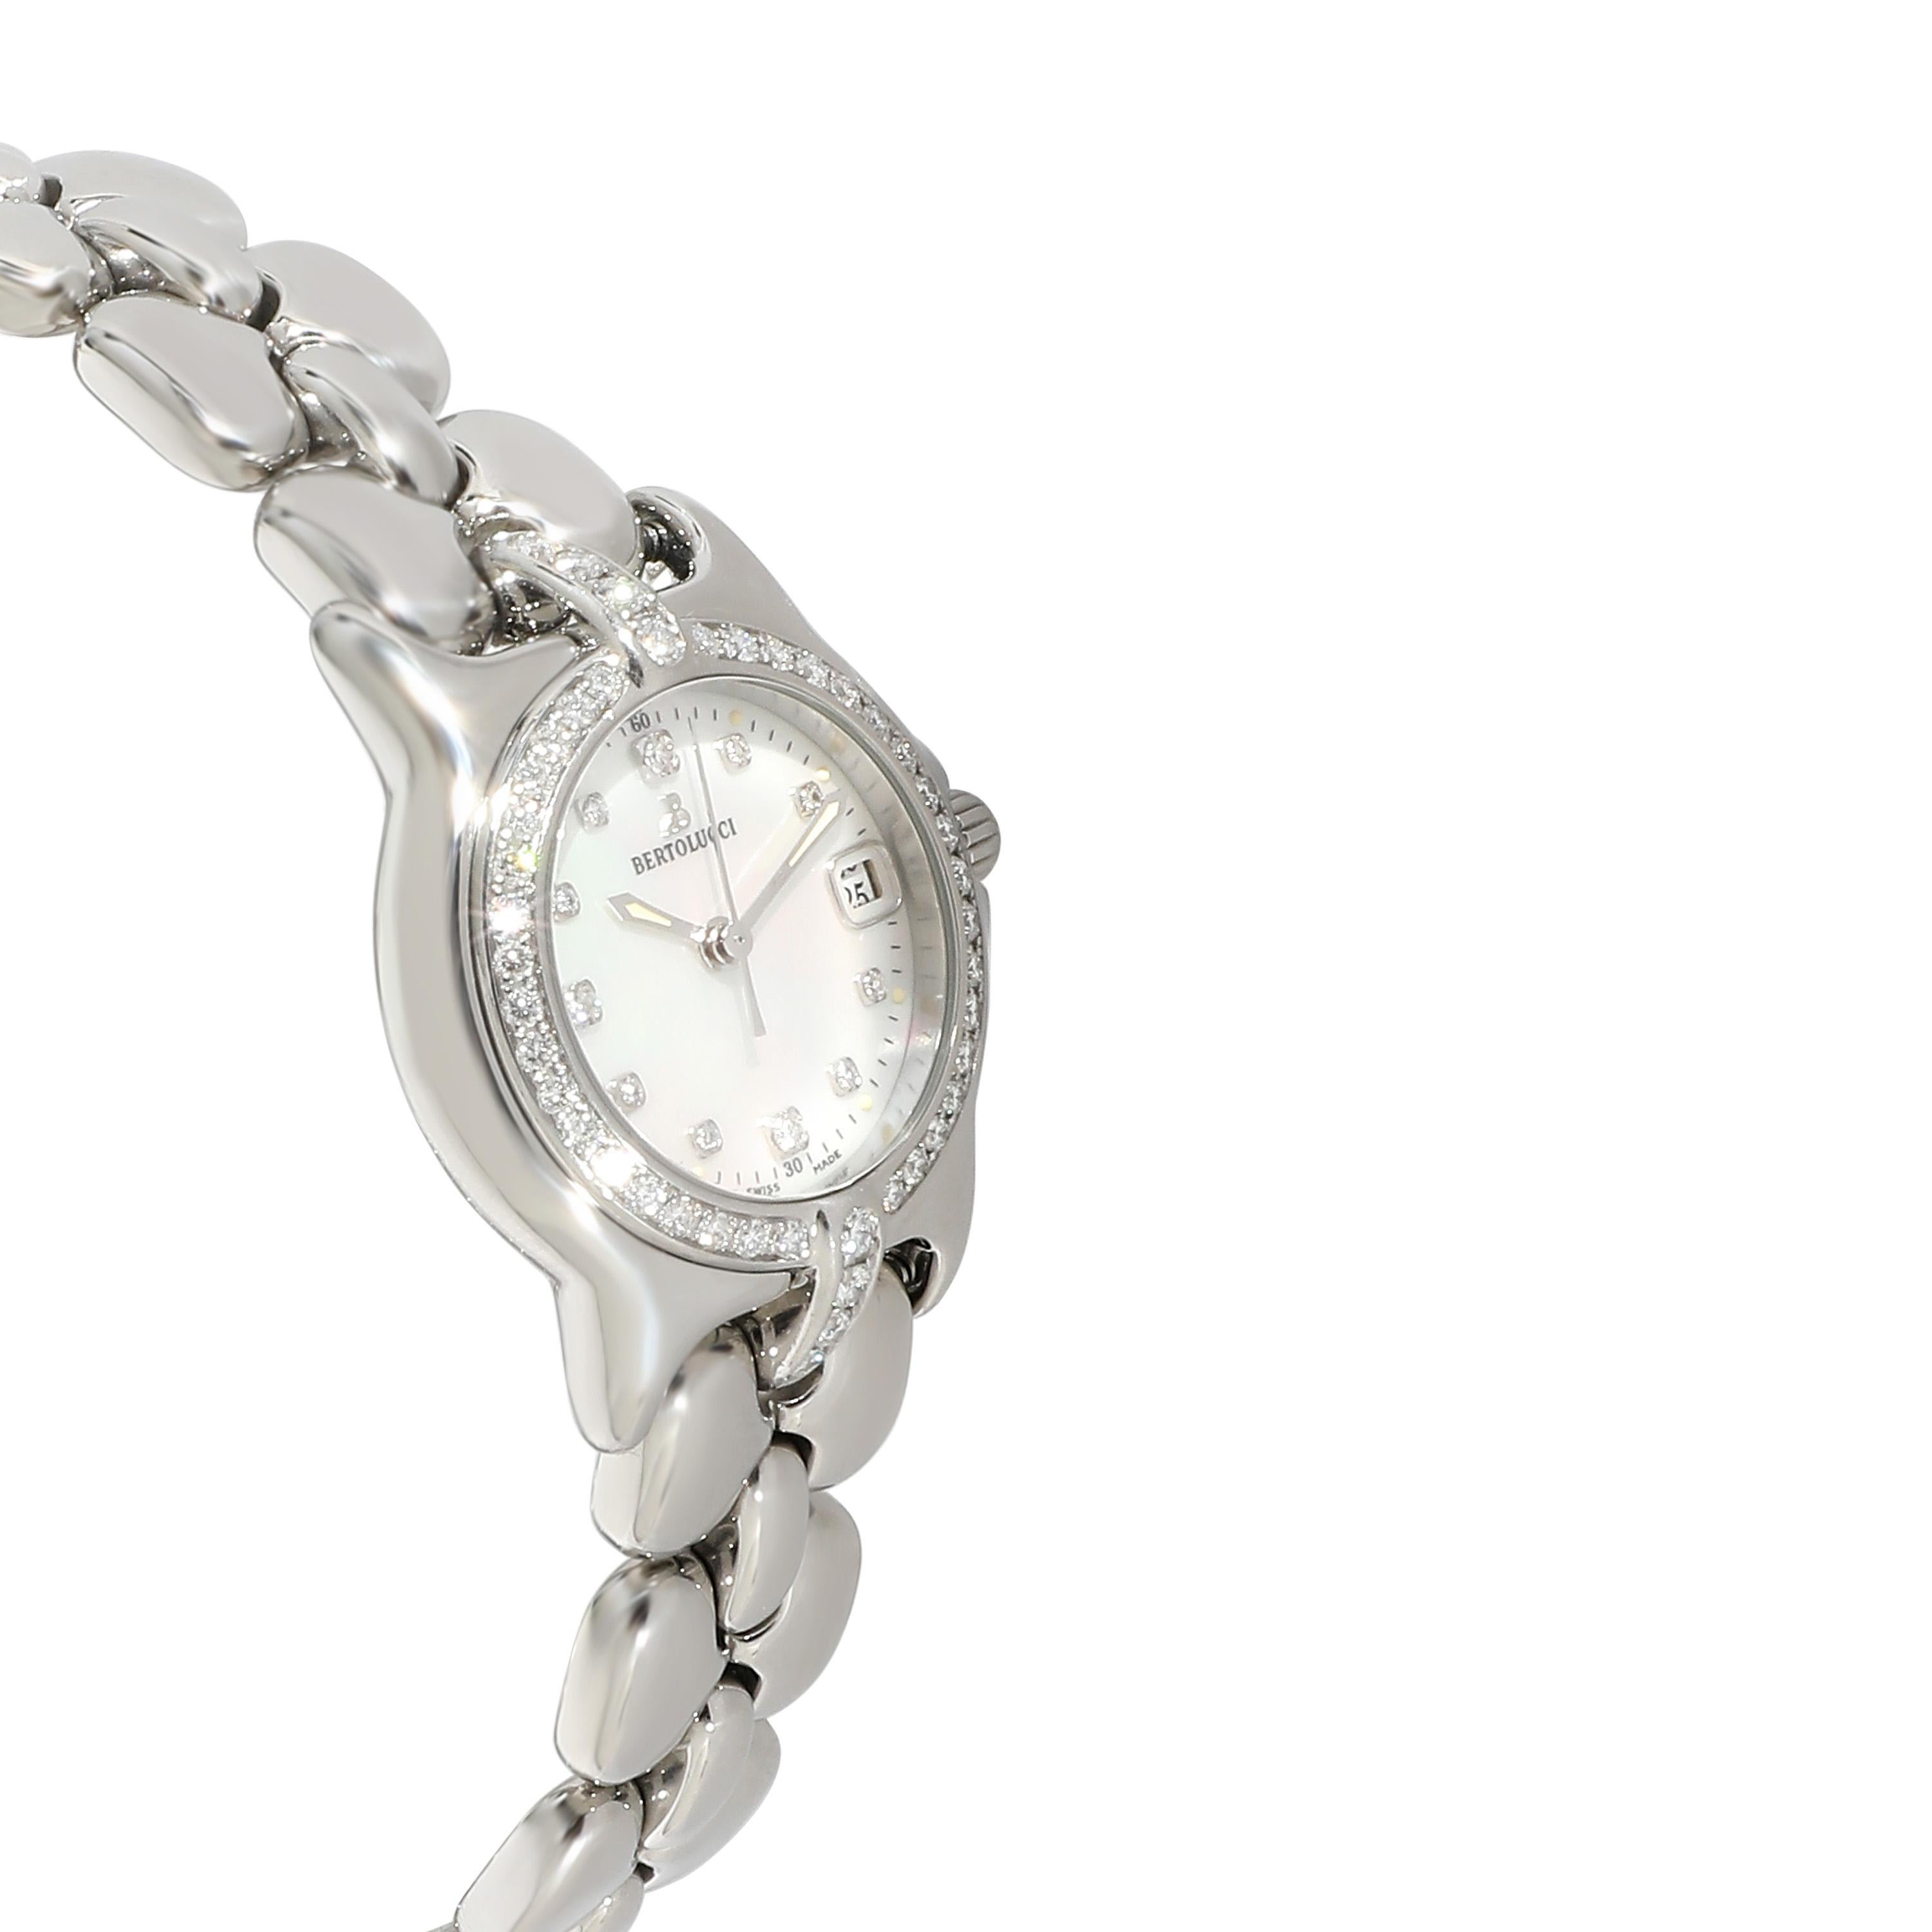 Bertolucci Pulchra 083 41 A Women's Watch in  Stainless Steel In Excellent Condition For Sale In New York, NY